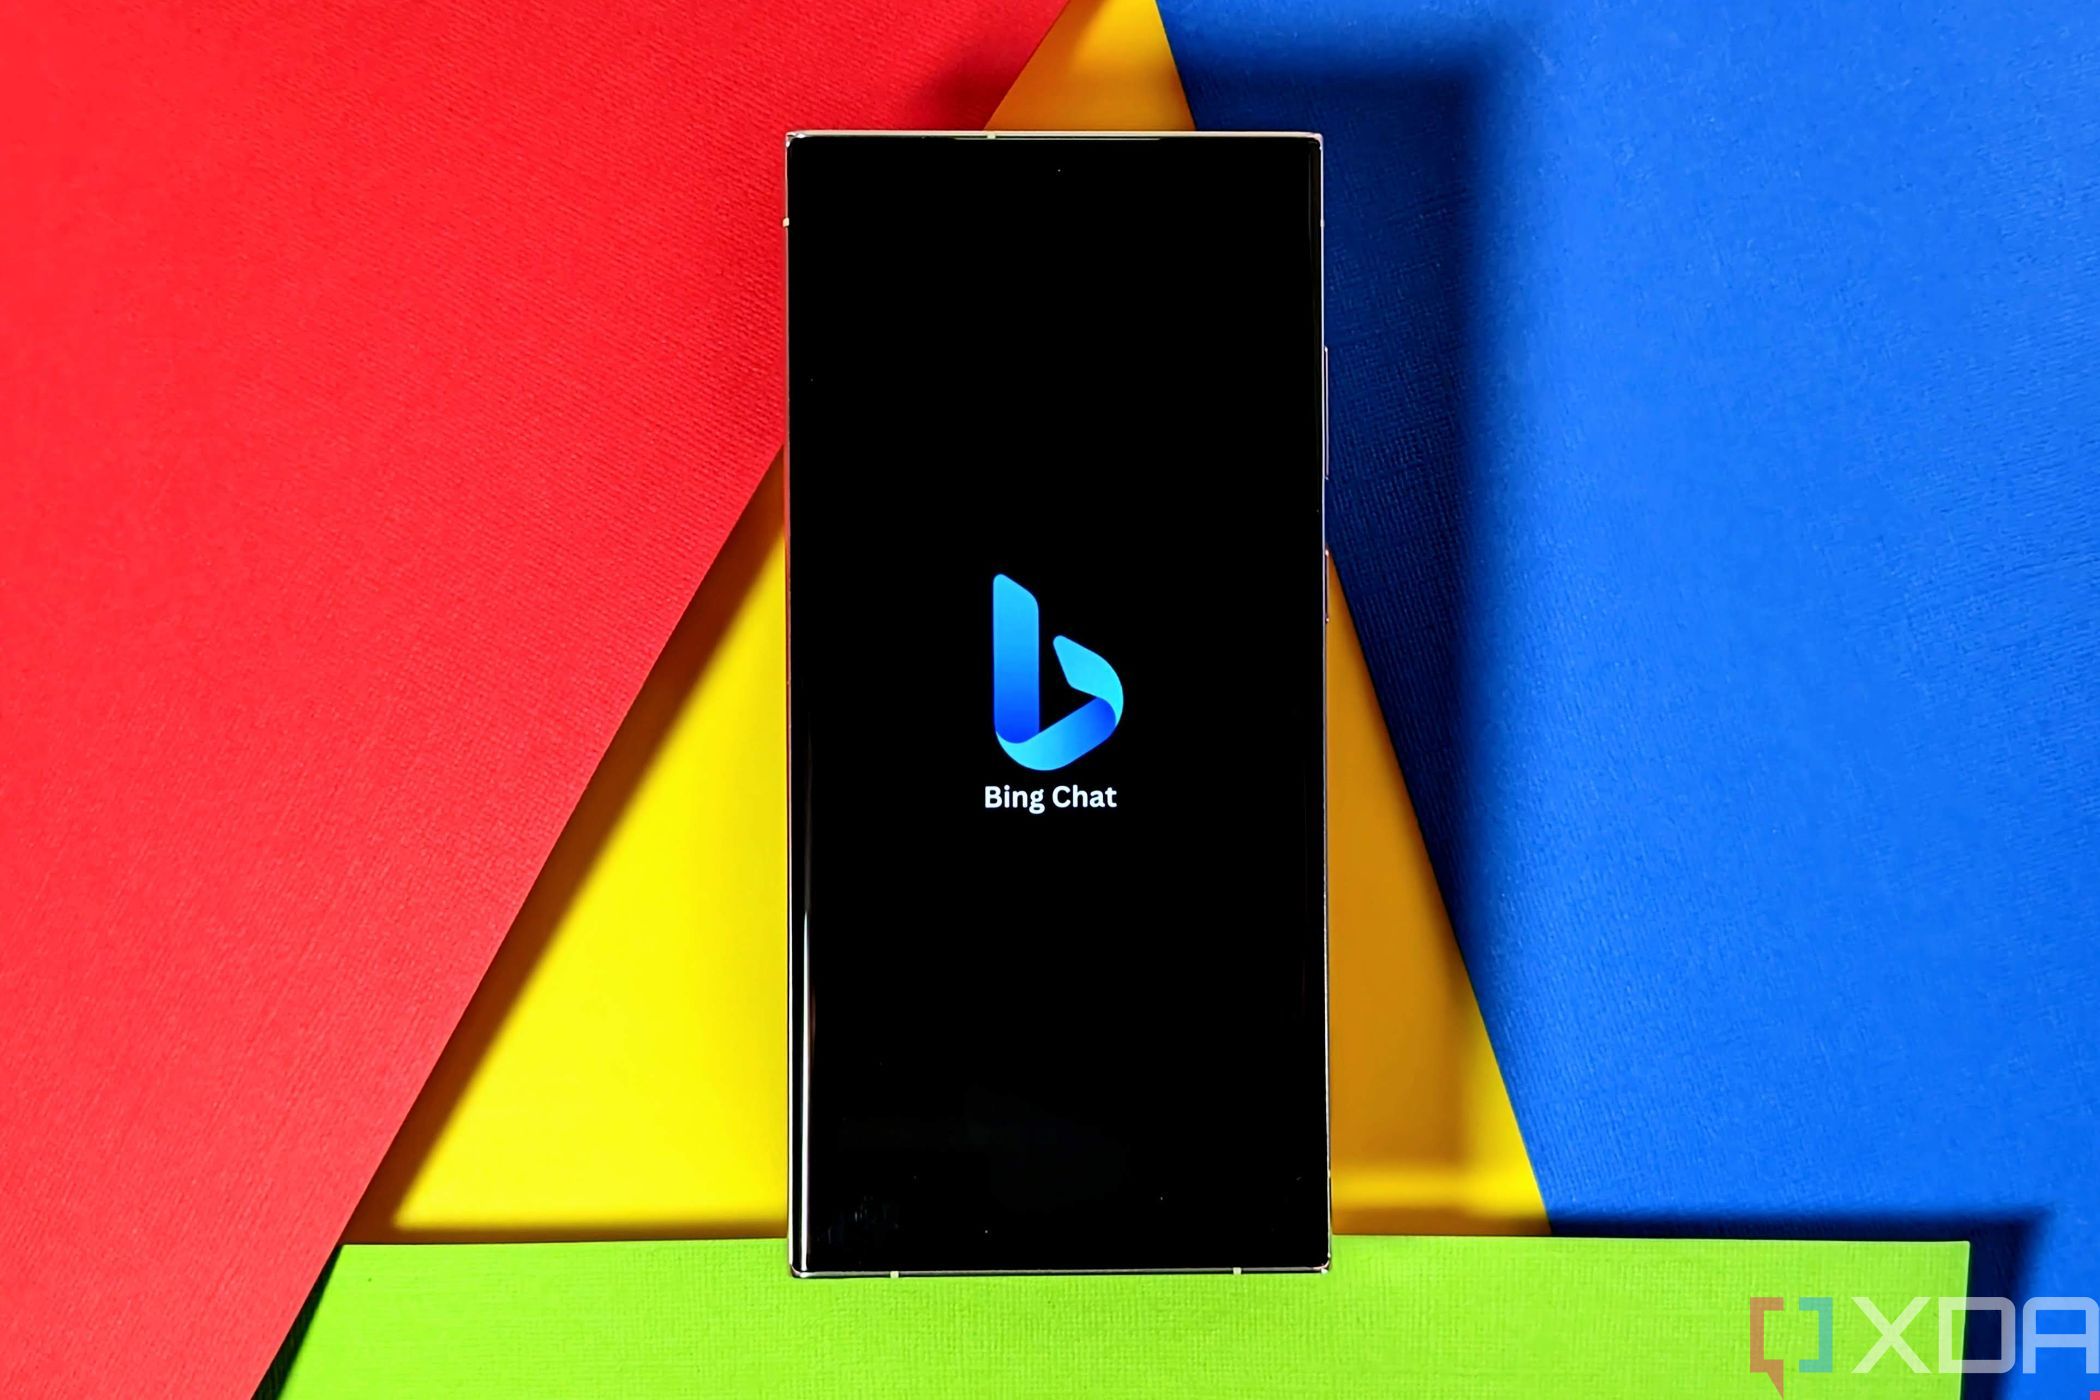 Samsung supposedly switching to Bing is all about diversification